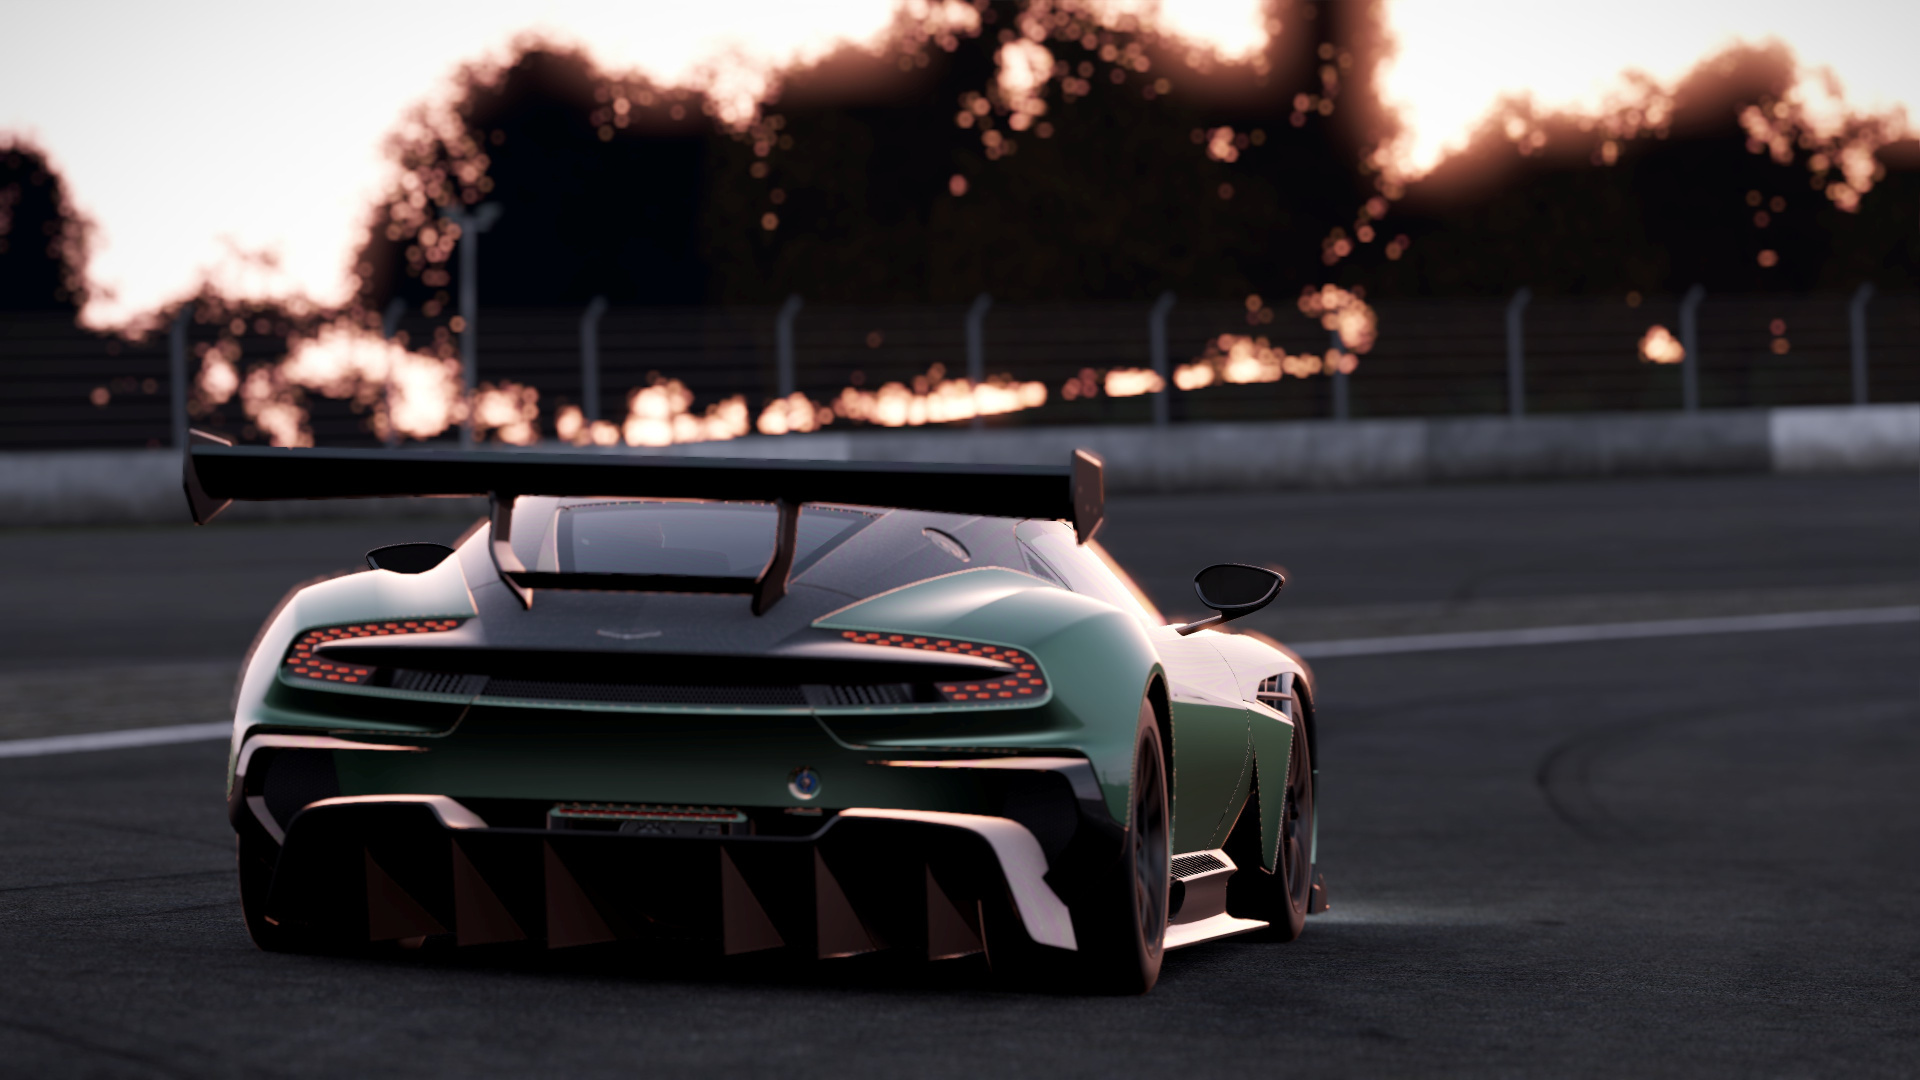 720p project cars 2